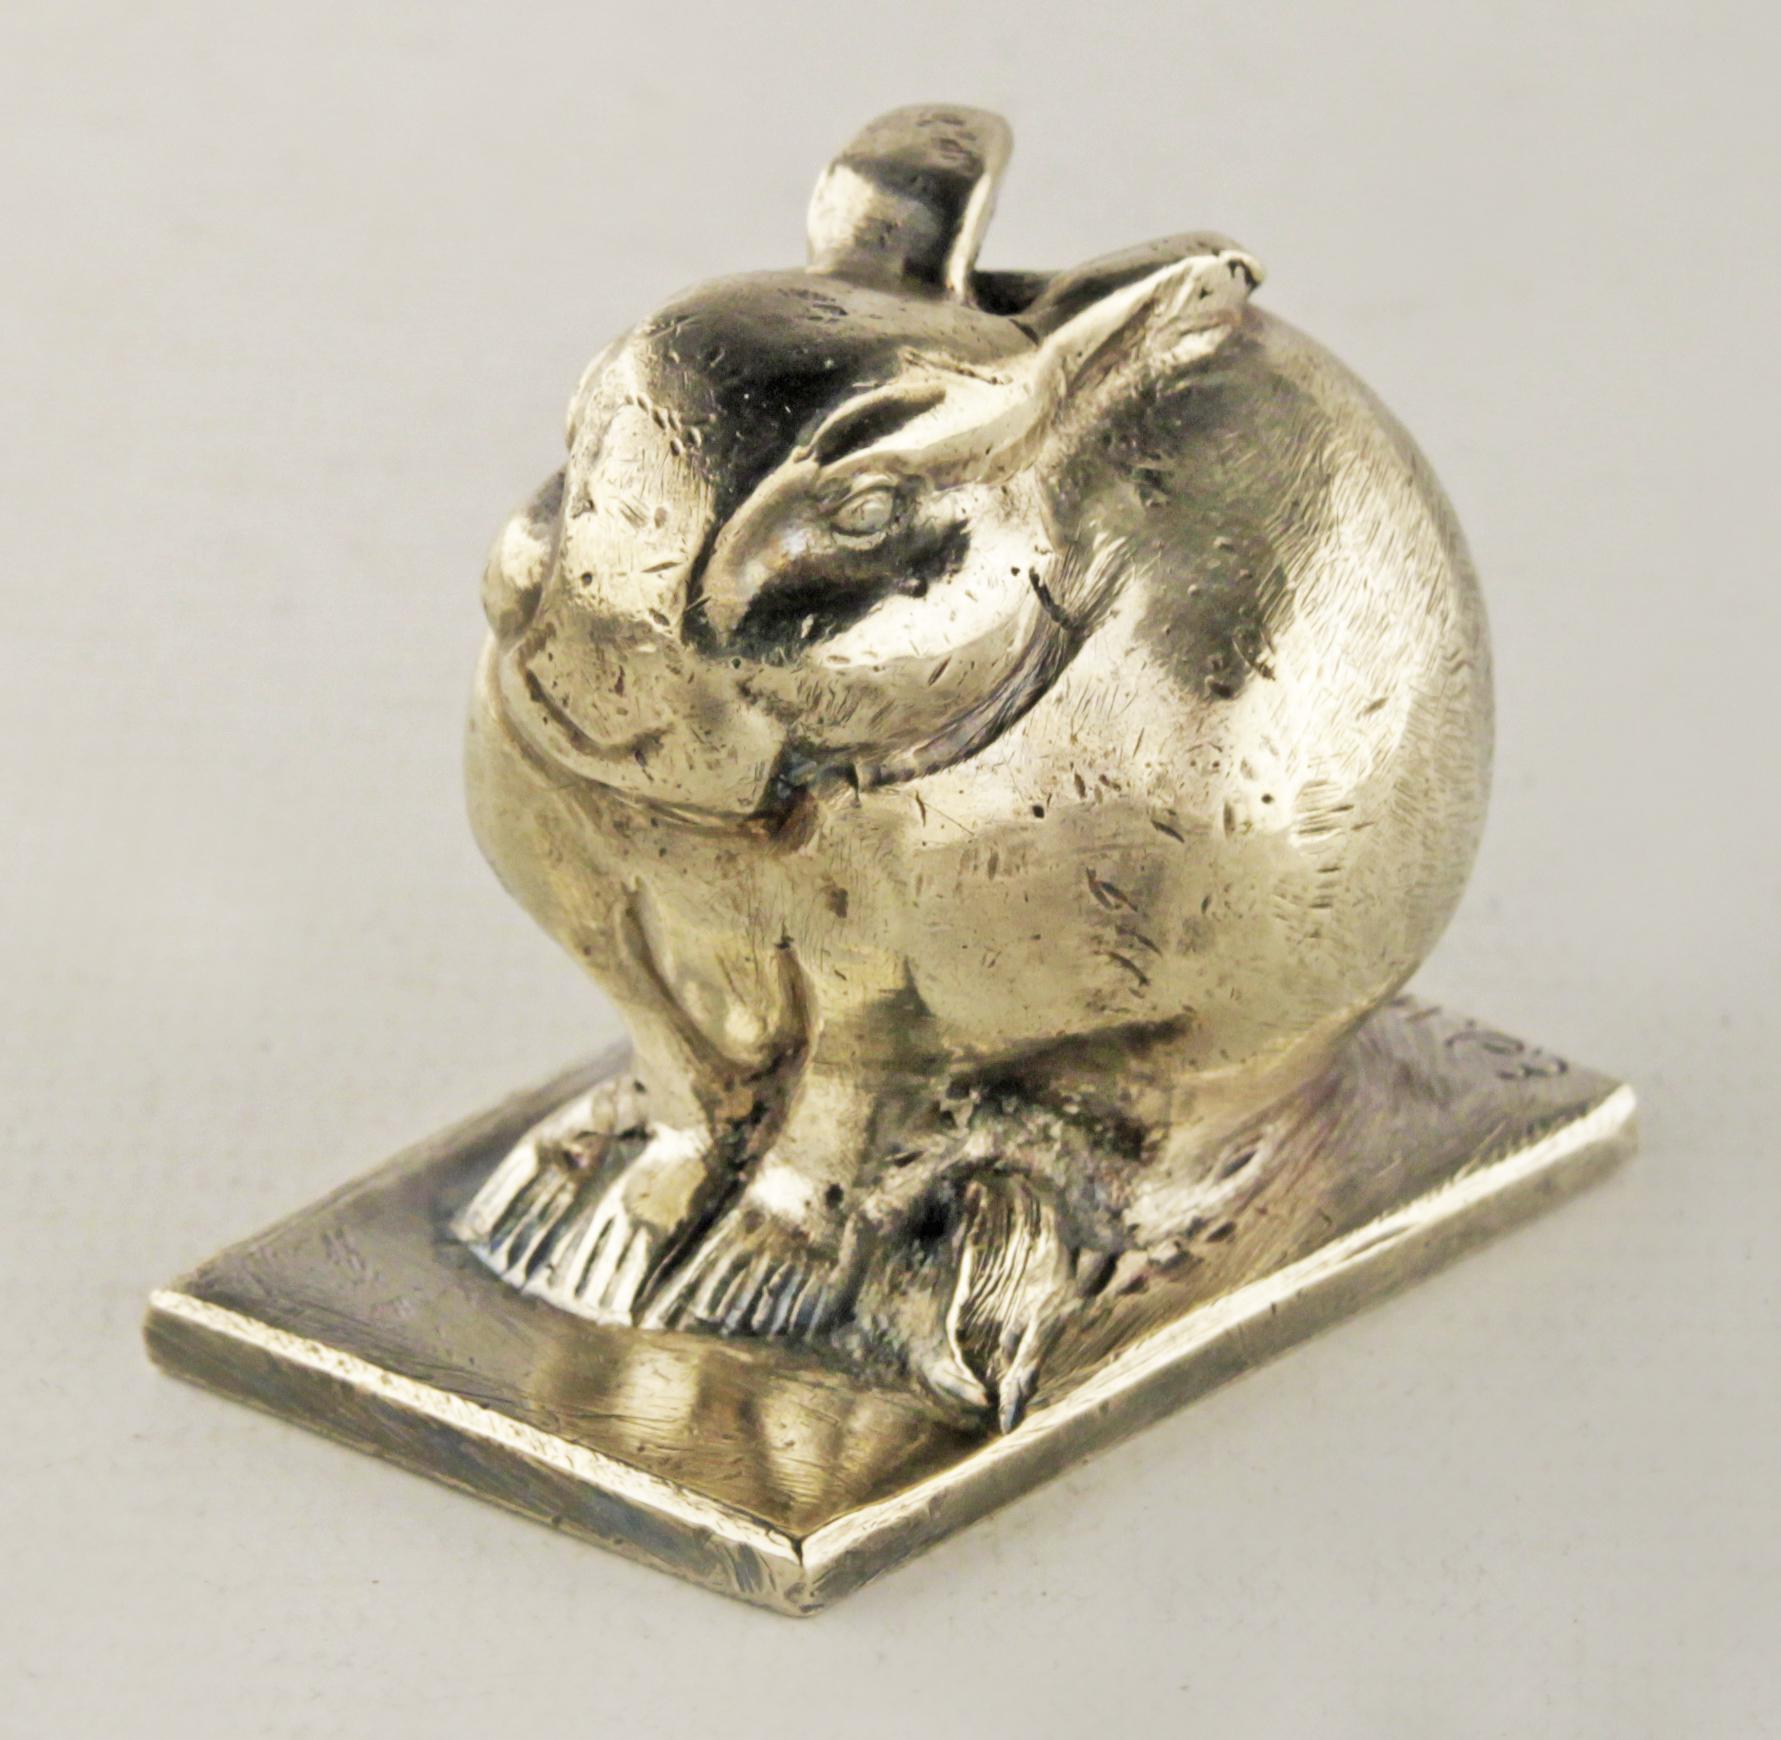 Art Déco silvered/nickeled bronze rabbit sculpture designed by animalier swiss author Édouard-Marcel Sandoz to be manufactured by the french firm Susse Frères

By: Édouard-Marcel Sandoz, Susse Frères
Material: bronze, nickel, silver,